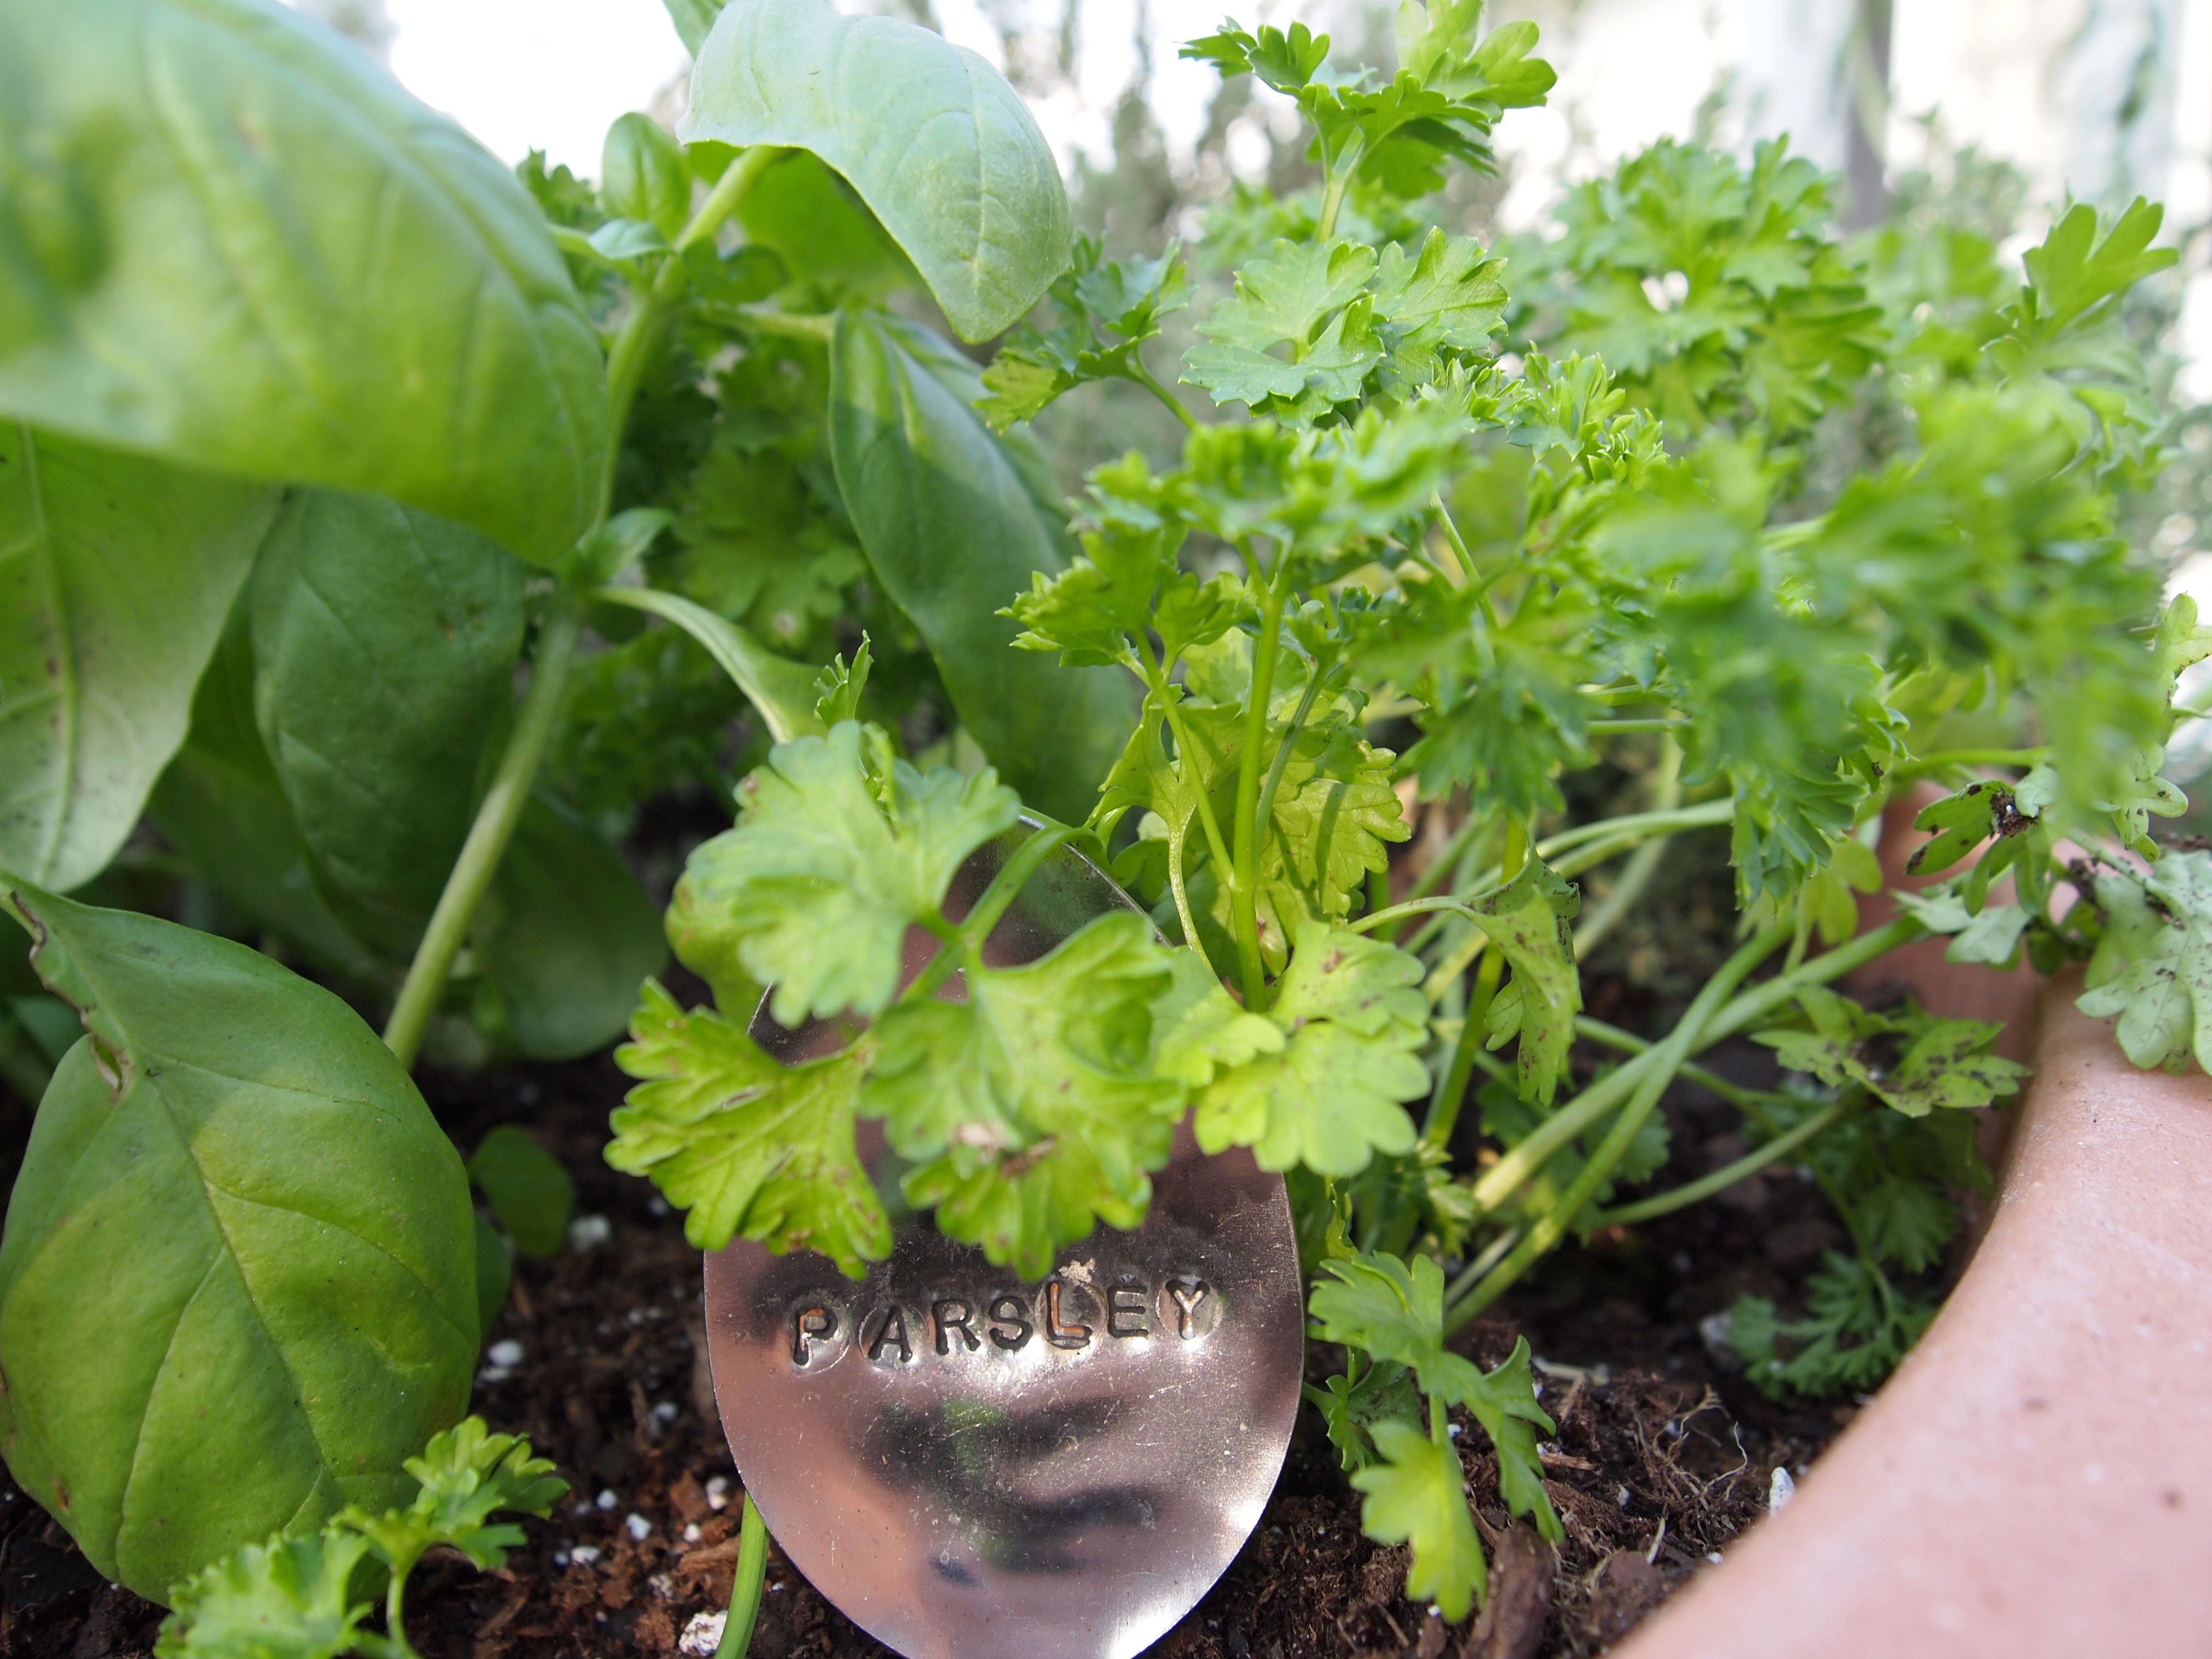 7 Tips for Growing Parsley- Parsley is a very useful (and tasty) herb that can be very easy to grow, if you know a couple of important things! Here are 7 handy tips for growing parsley! | #parsley #herbs #growYourOwn #herbGarden #gardening #garden #gardeningTips